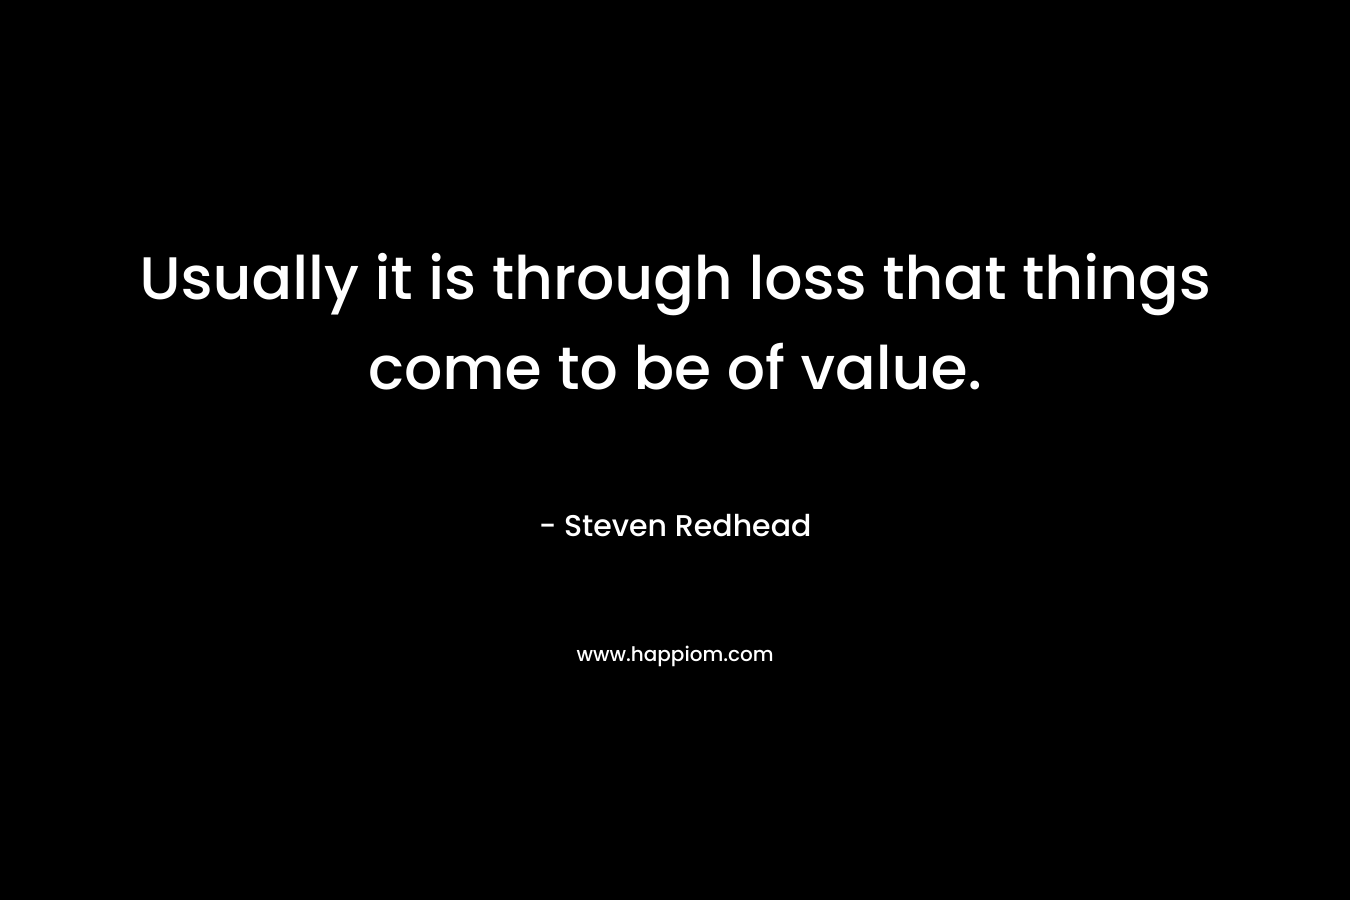 Usually it is through loss that things come to be of value.